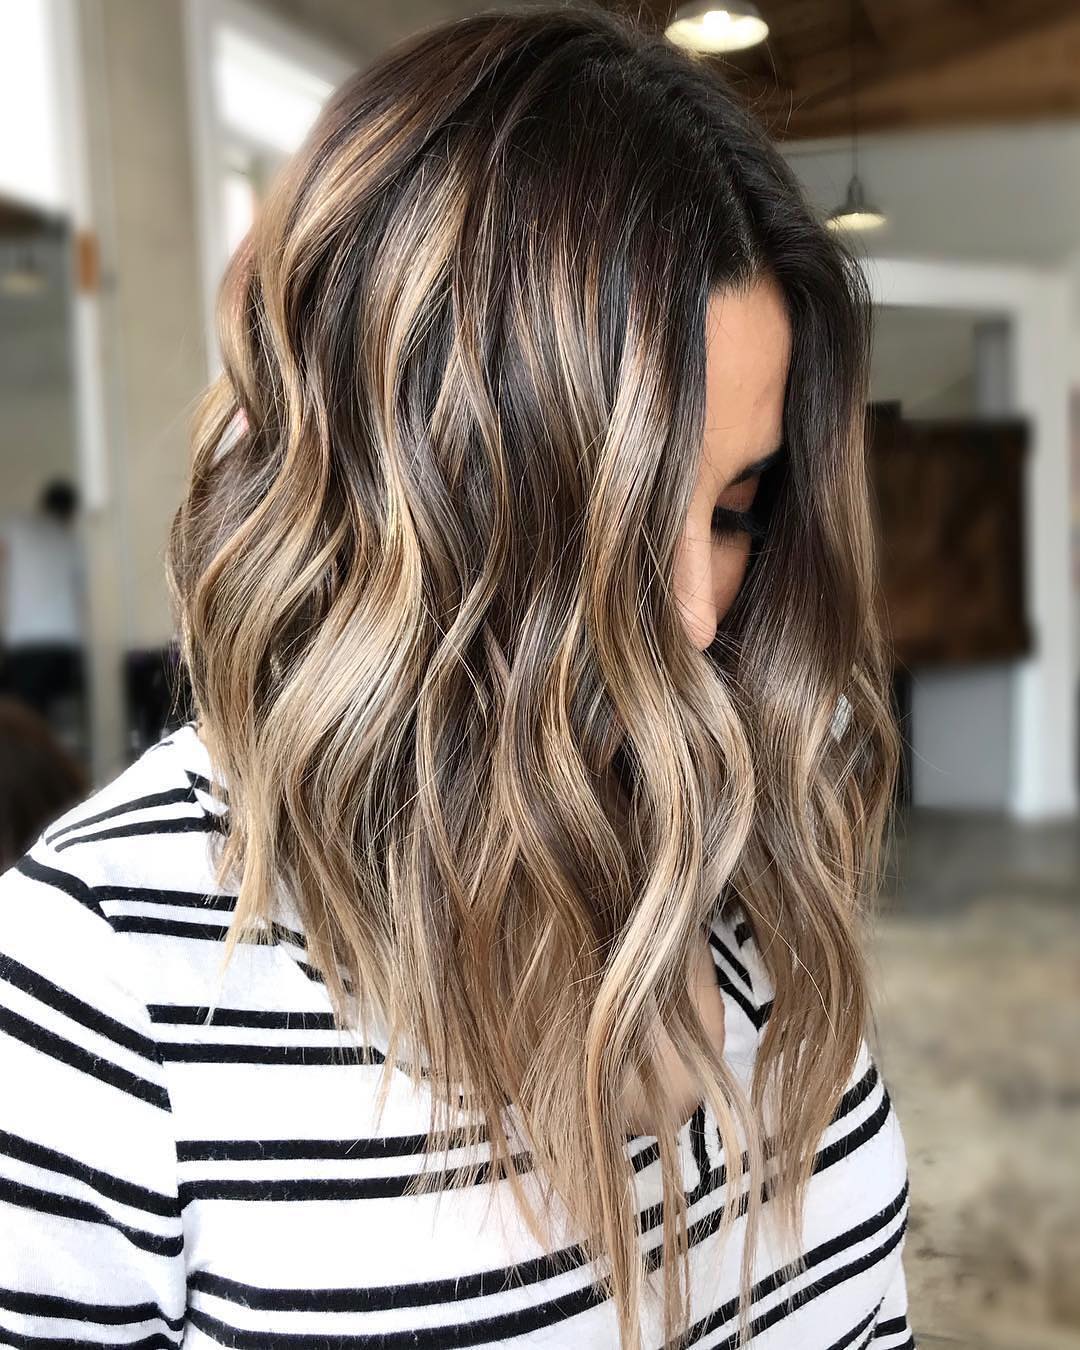 10 Ombre Balayage Hairstyles For Medium Length Hair Hair Color 2020